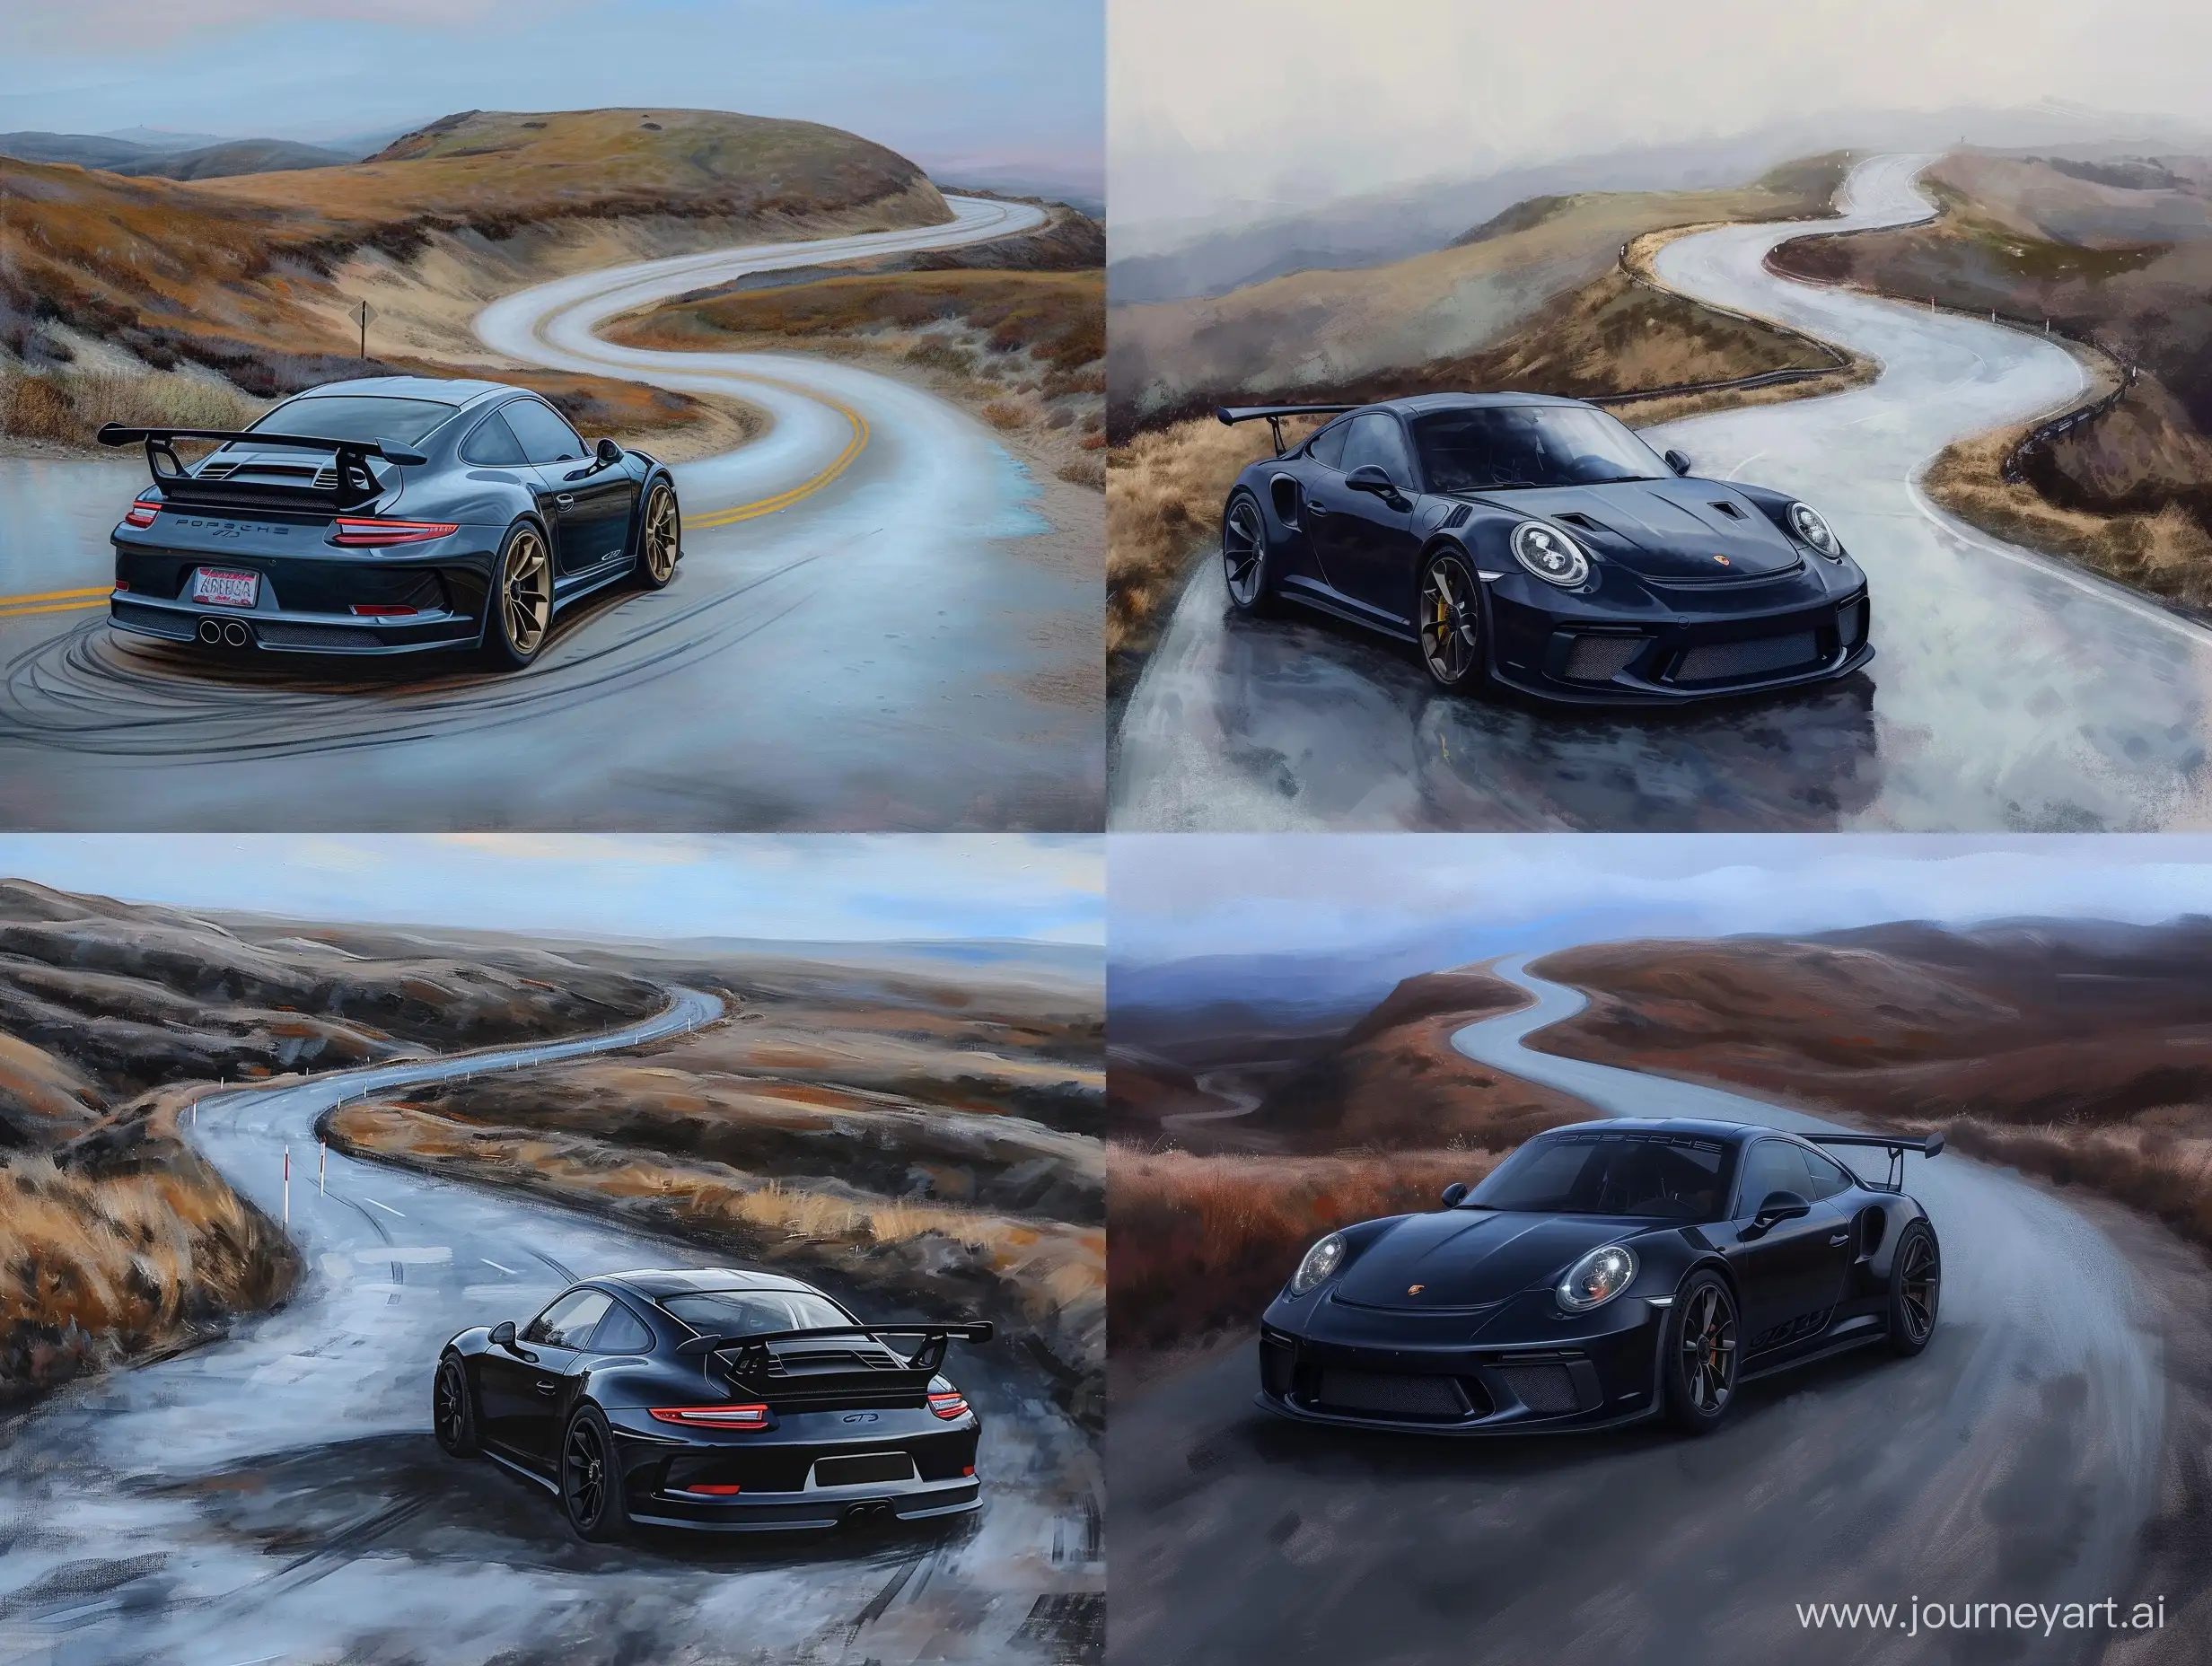 Scenic-Drive-Black-Porsche-911-GT3-on-Curvy-Hilly-Road